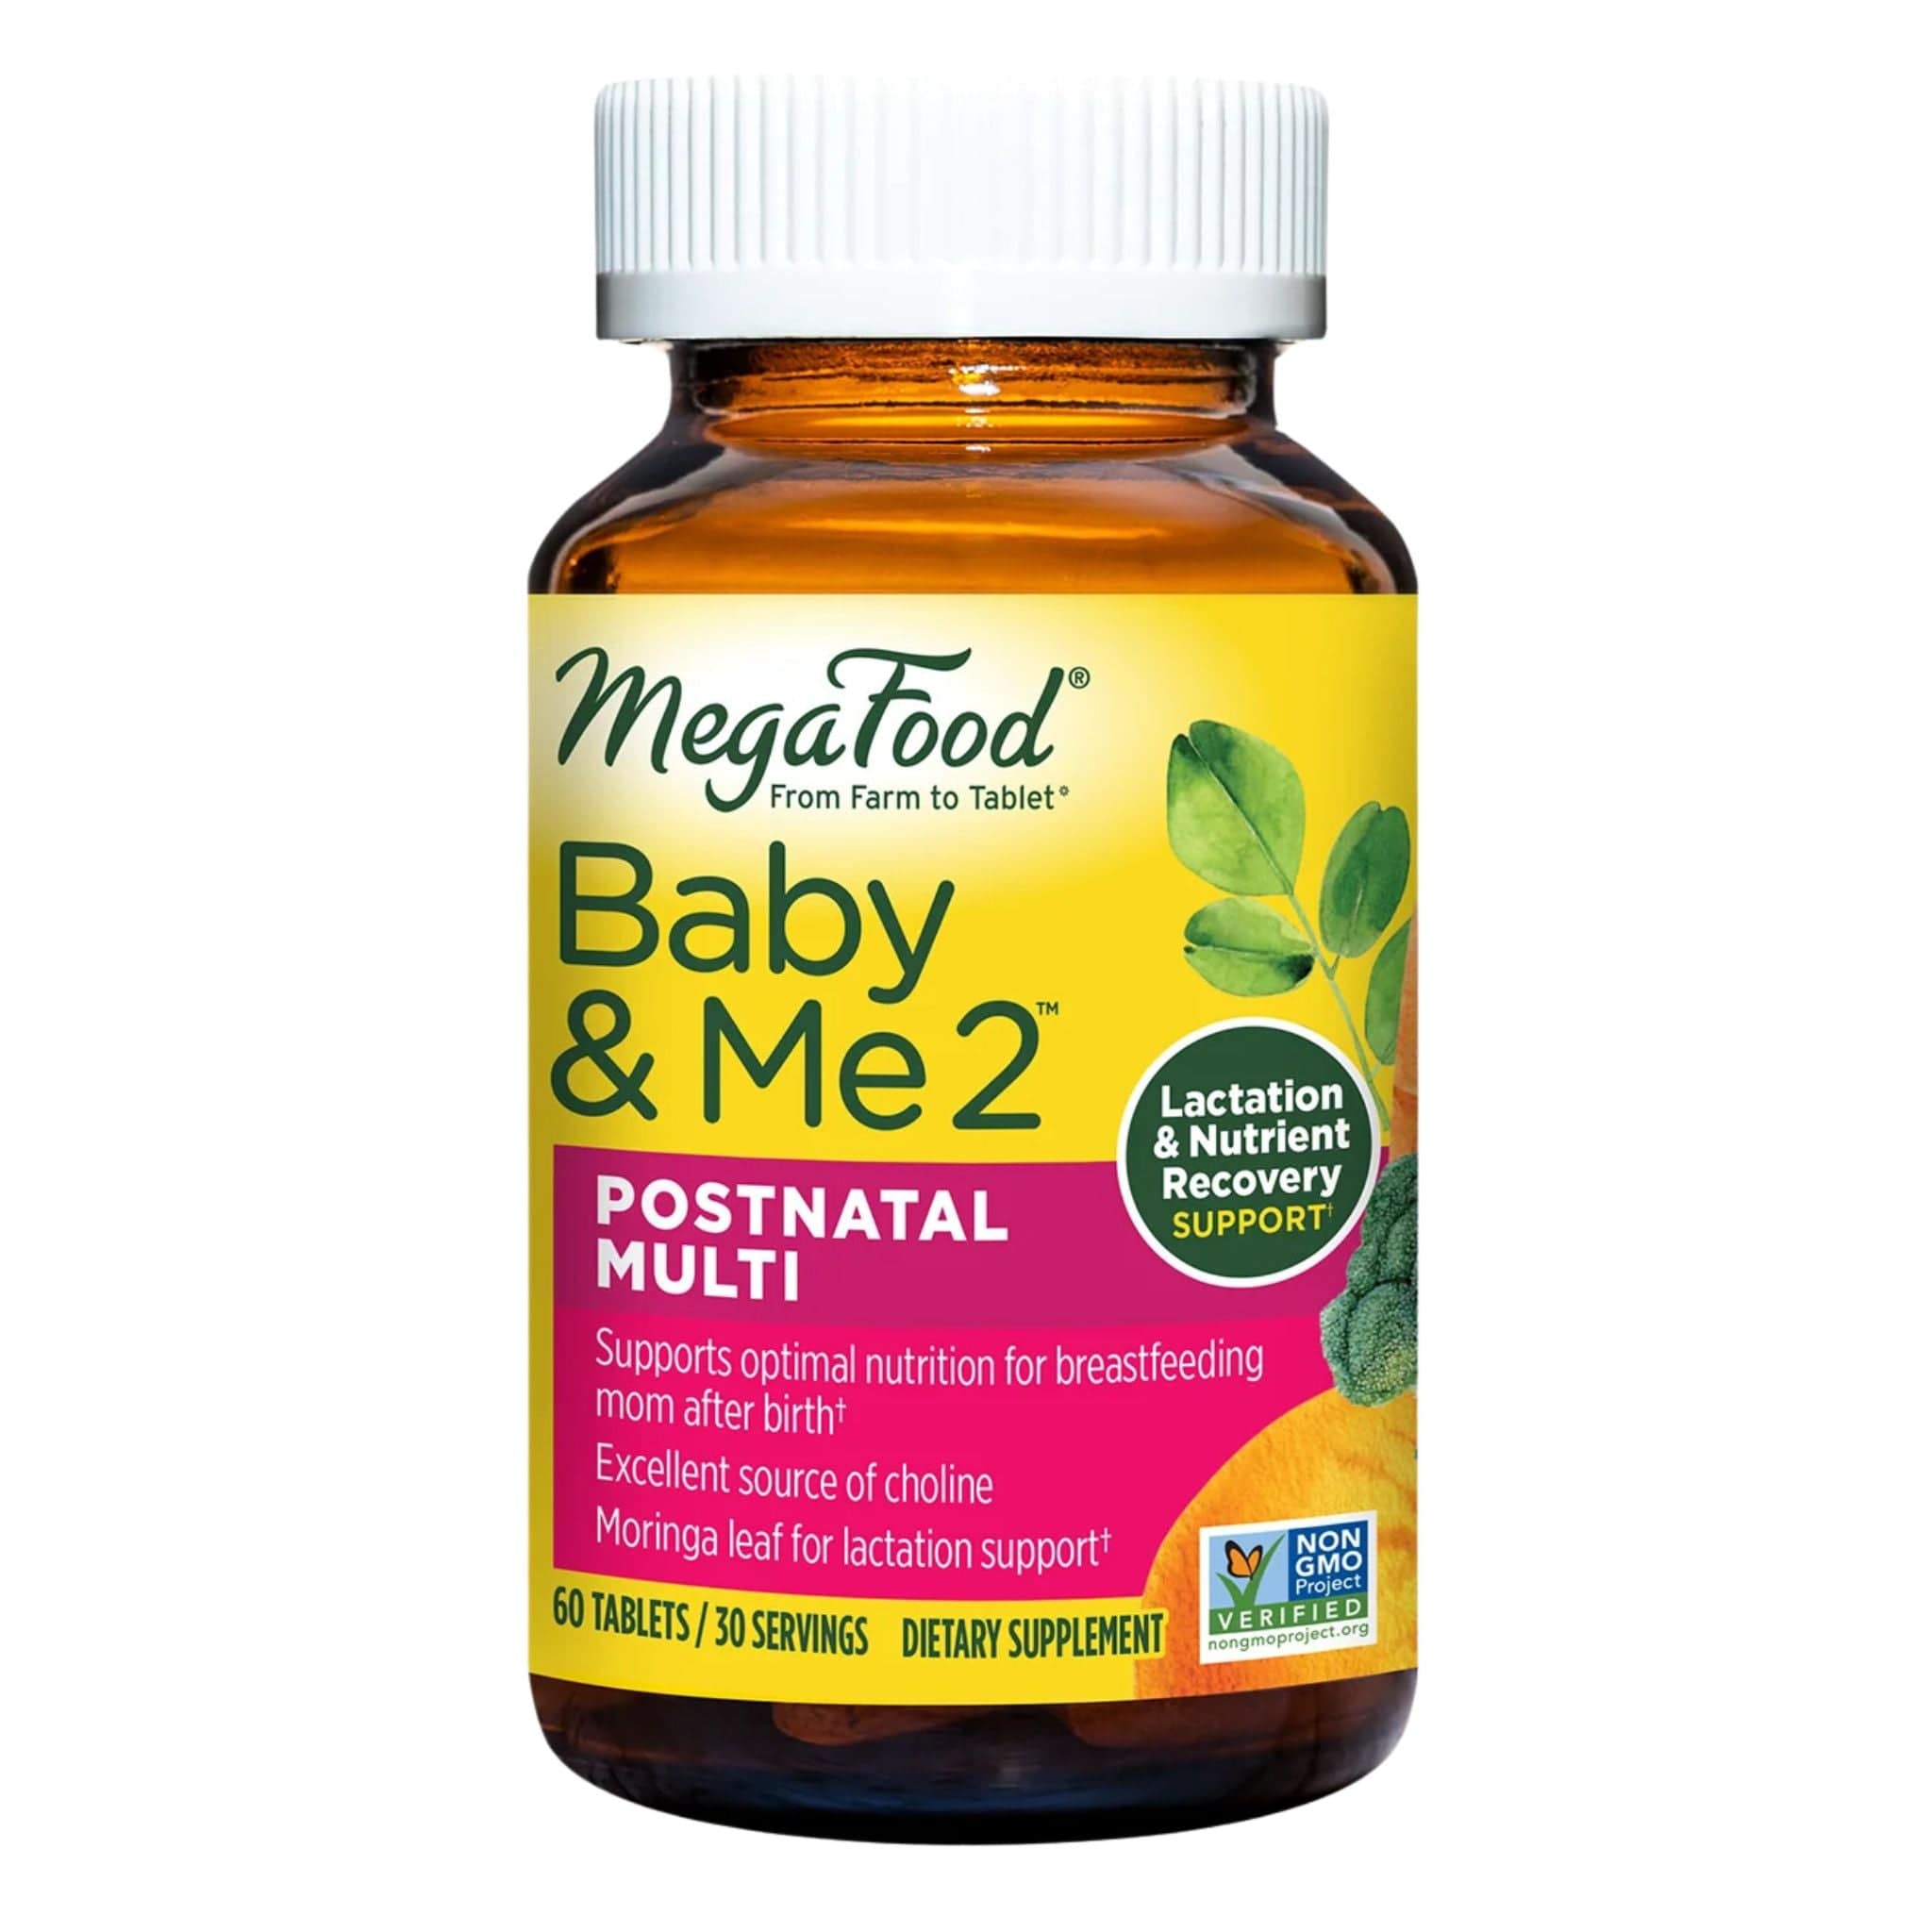 MegaFood Baby and Me 2, Postnatal Multivitamin & Mineral, Lactation and  Nutrient Recovery